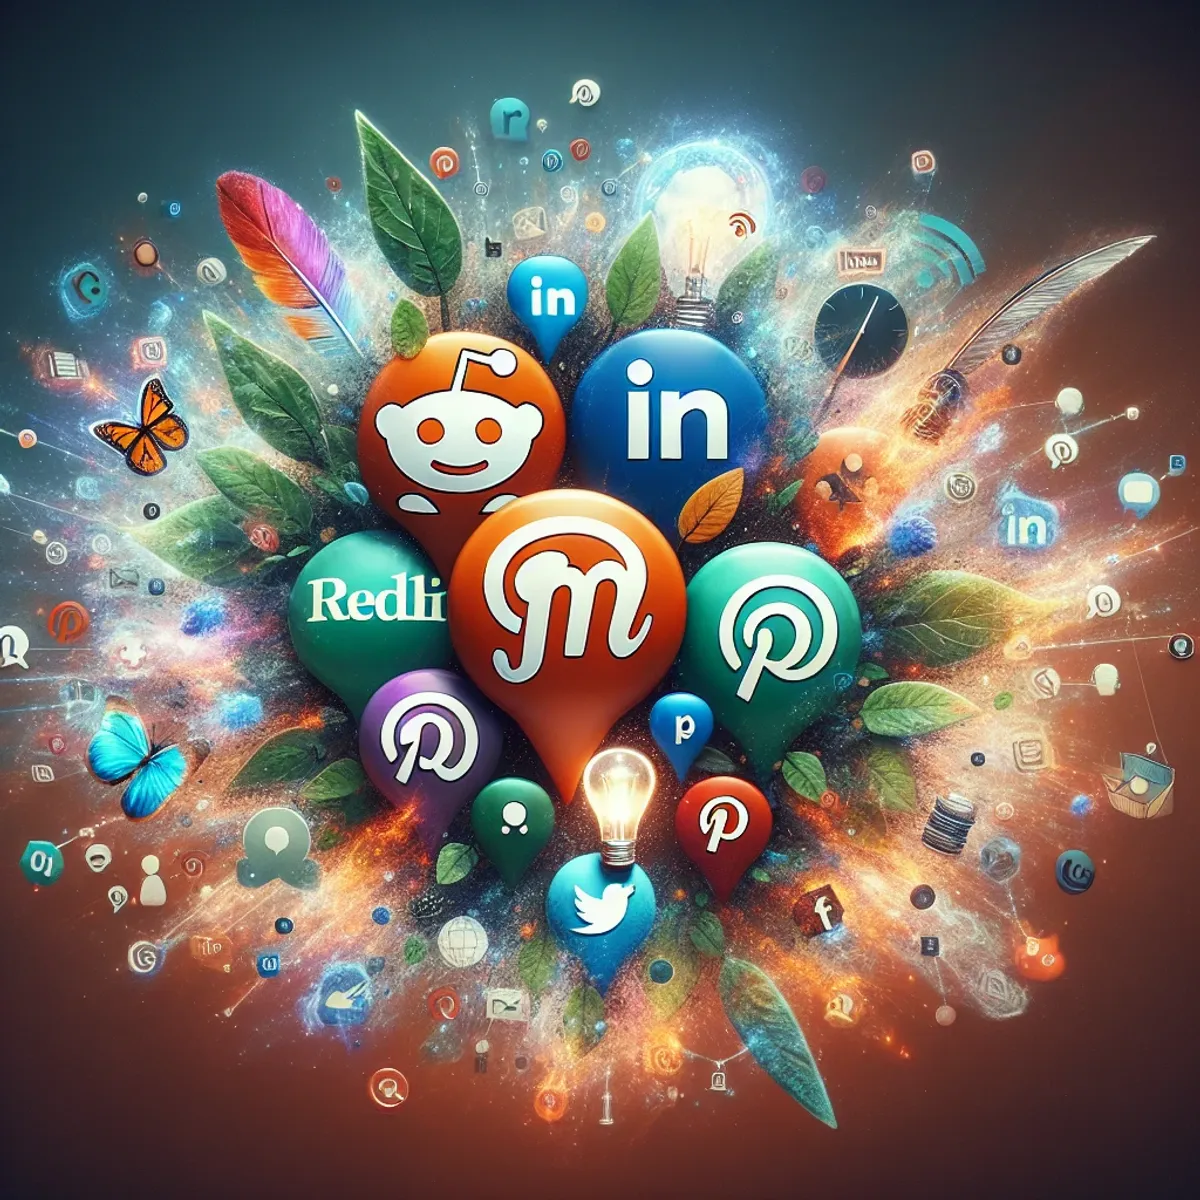 An image showcasing the icons of popular digital platforms such as Medium, Reddit, LinkedIn, Quora, and Pinterest, surrounded by an aura of thriving creativity, symbolizing the publishing of high-quality content on these platforms. The icons are vividly colored and stand out against a contrasted background, each represents a platform of communication and knowledge sharing. Visual metaphors for high-quality content like a feather quill, a shining lightbulb, or a stack of well-bound books should be subtly included in the image."